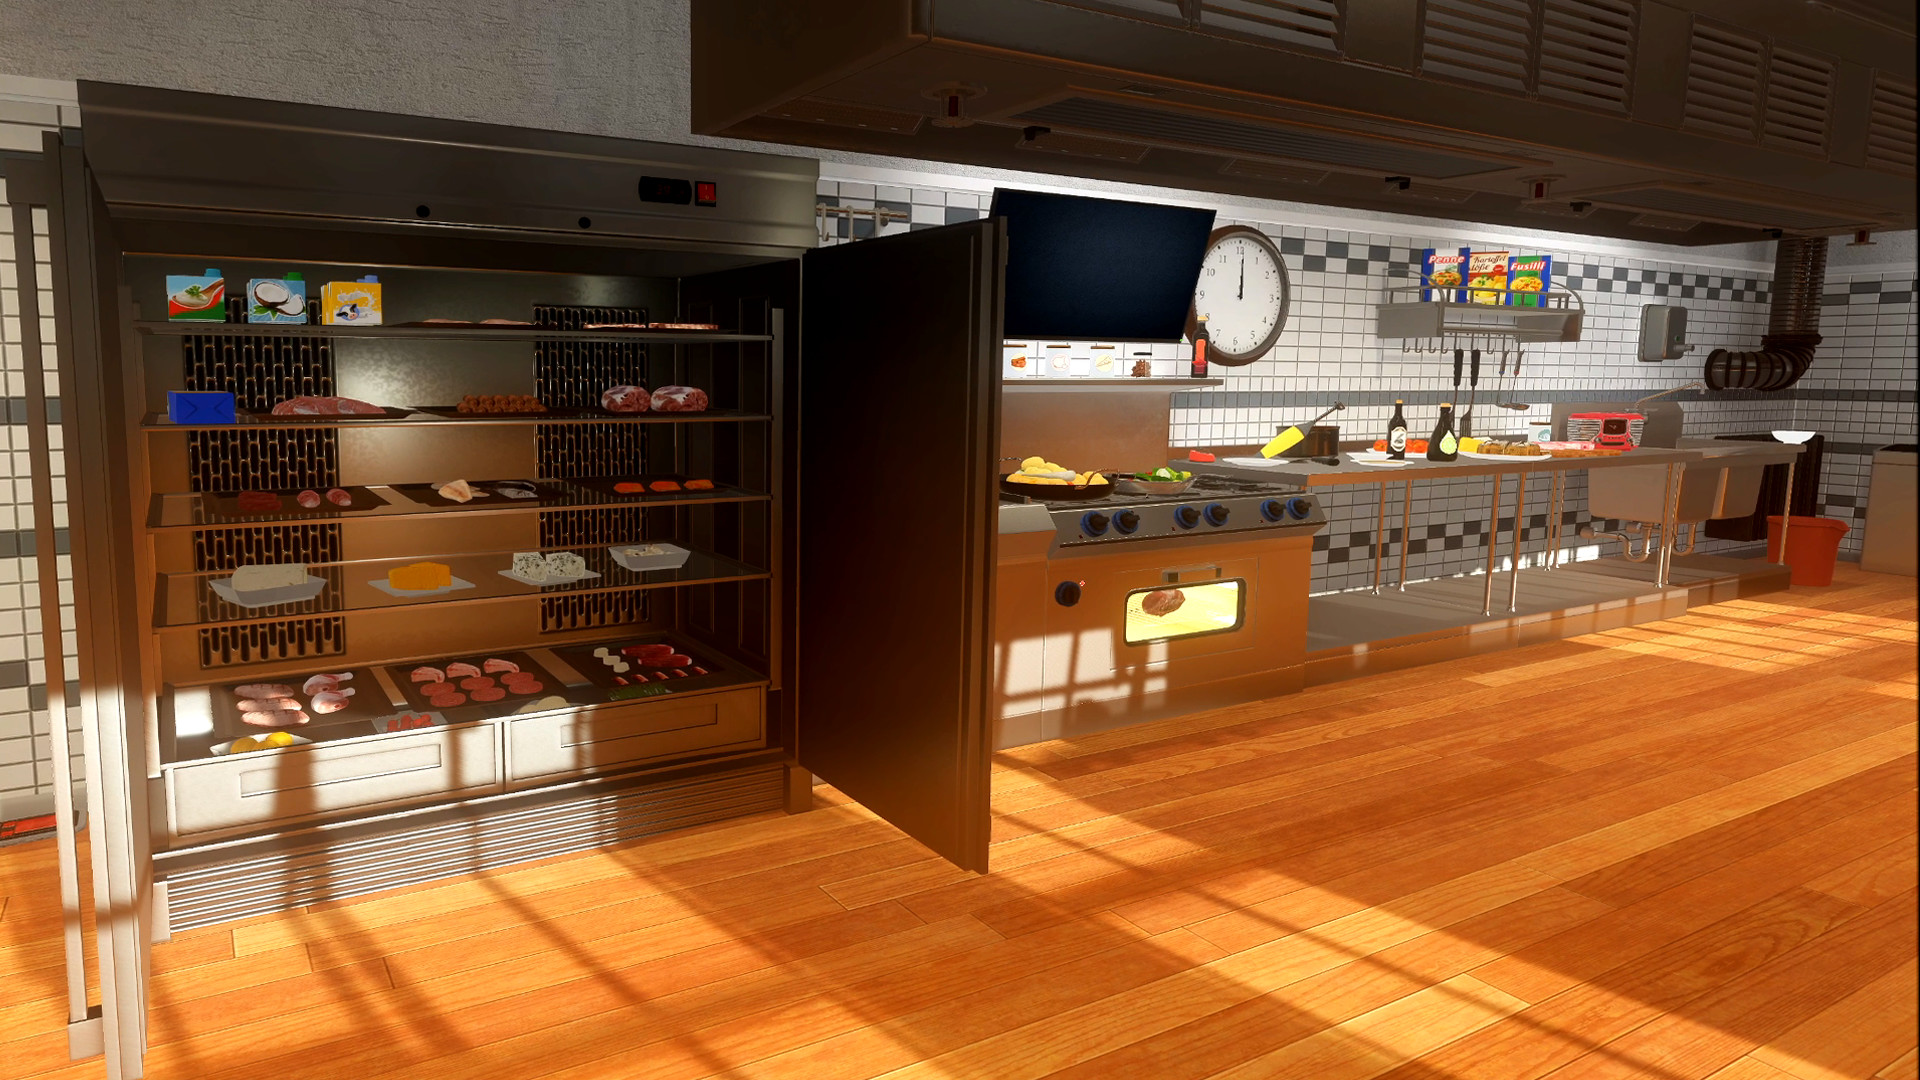 Cooking Simulator VR Arrives On PC